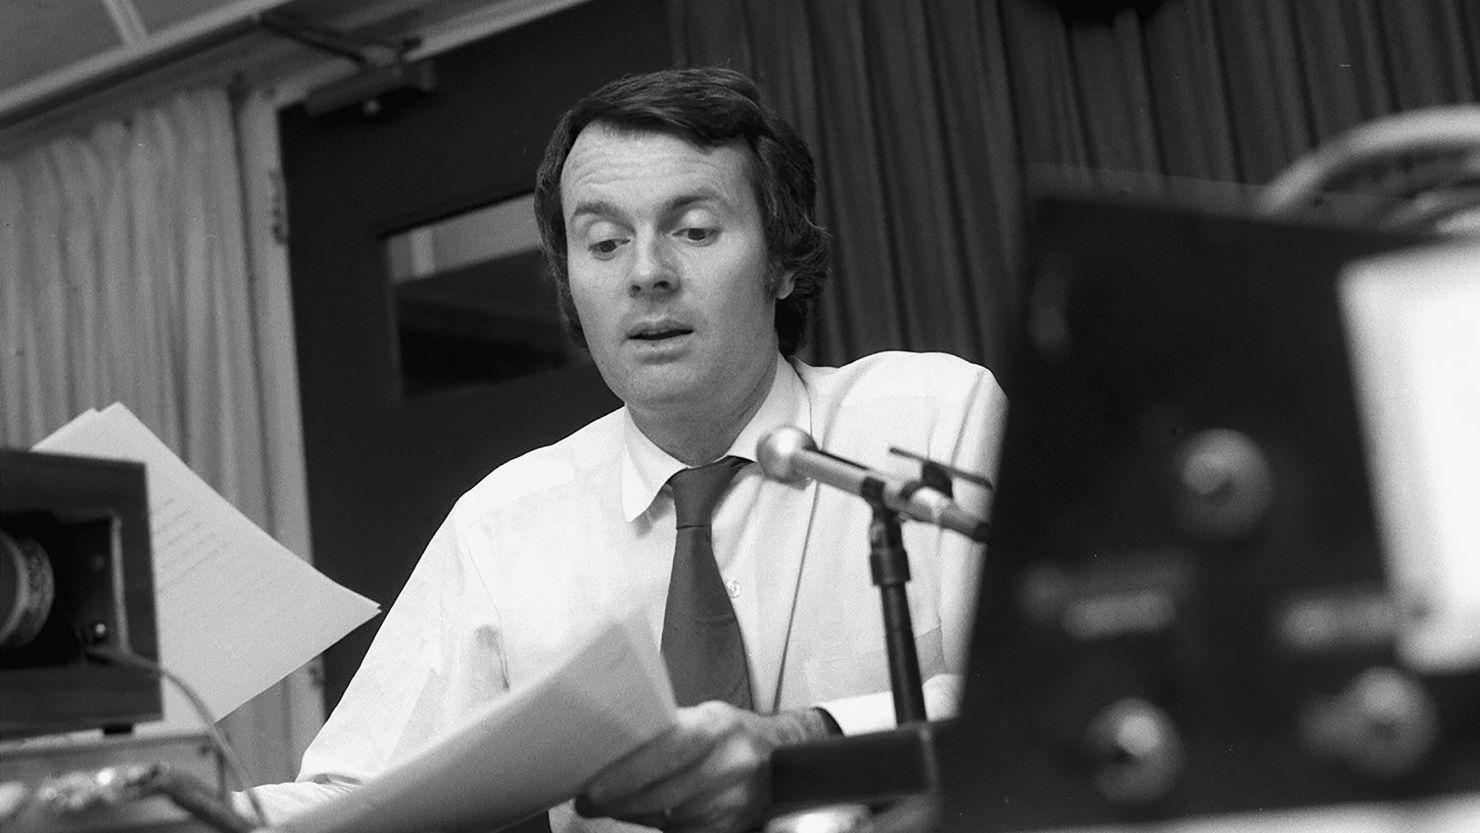 NEW YORK - APRIL 24: Charles Osgood on CBS radio.  Image dated April 24, 1972. (Photo by CBS via Getty Images)